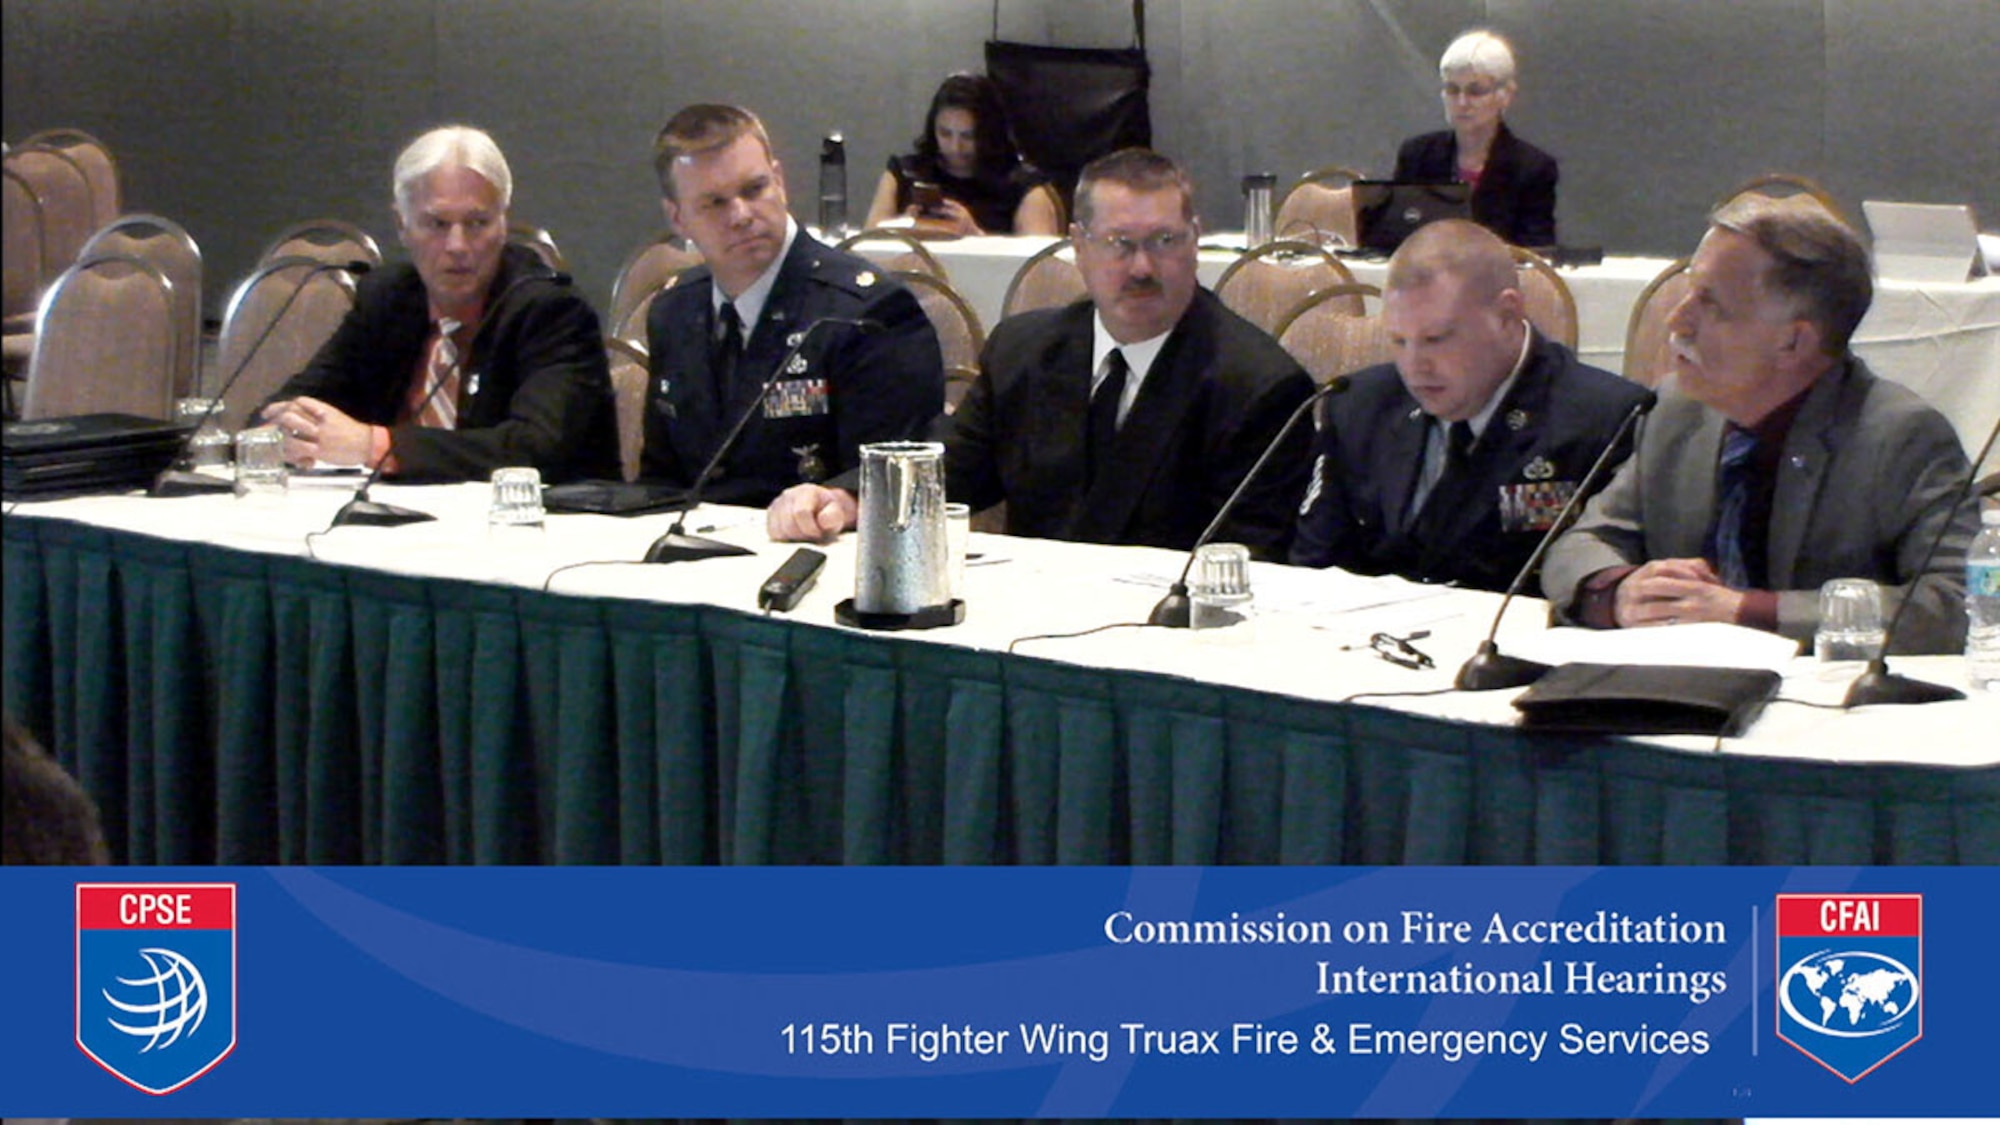 The 115th Fighter Wing Truax Fire and Emergency Services fire department sits in an accreditation hearing in Orlando, Flo., March 16, 2016. The 115 FW Truax Fire and Emergency Services fire department became the first in Dane County and the ninth in the state to be accredited. (Photo courtesy of Master Sgt. Gary Peck)